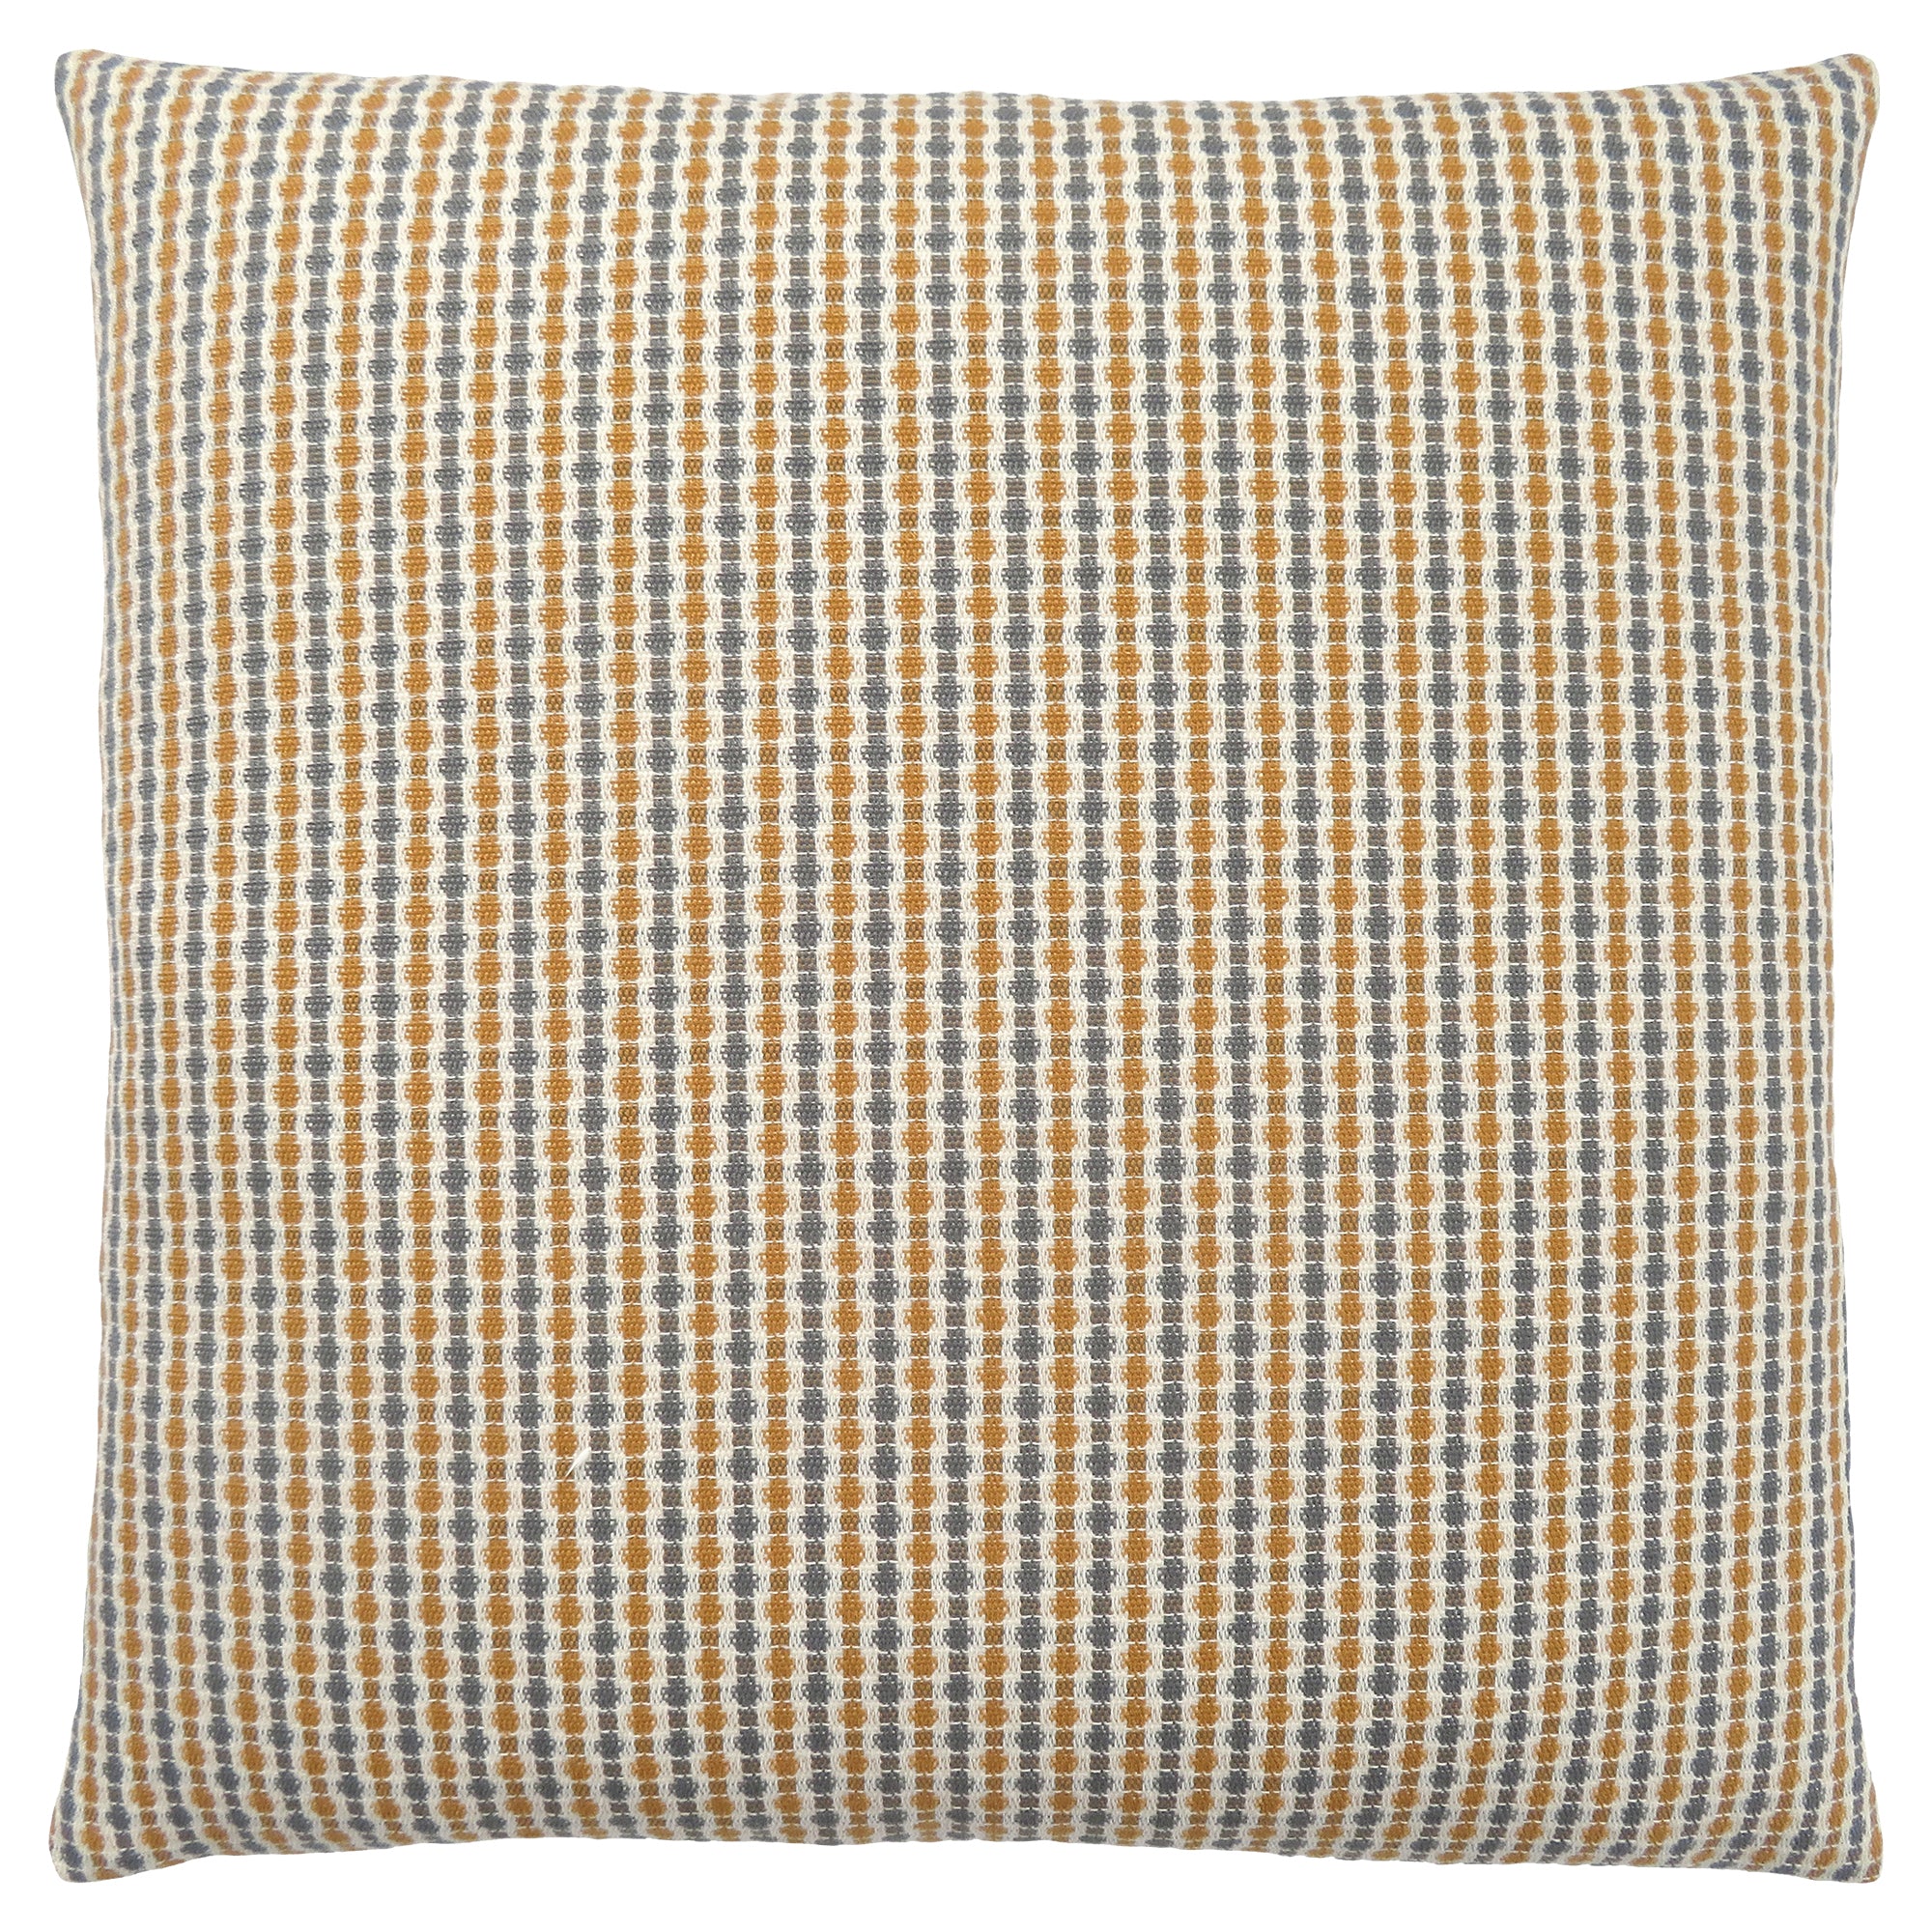 Pillow - 18X 18 / Gold / Grey Abstract Dot / 1Pc